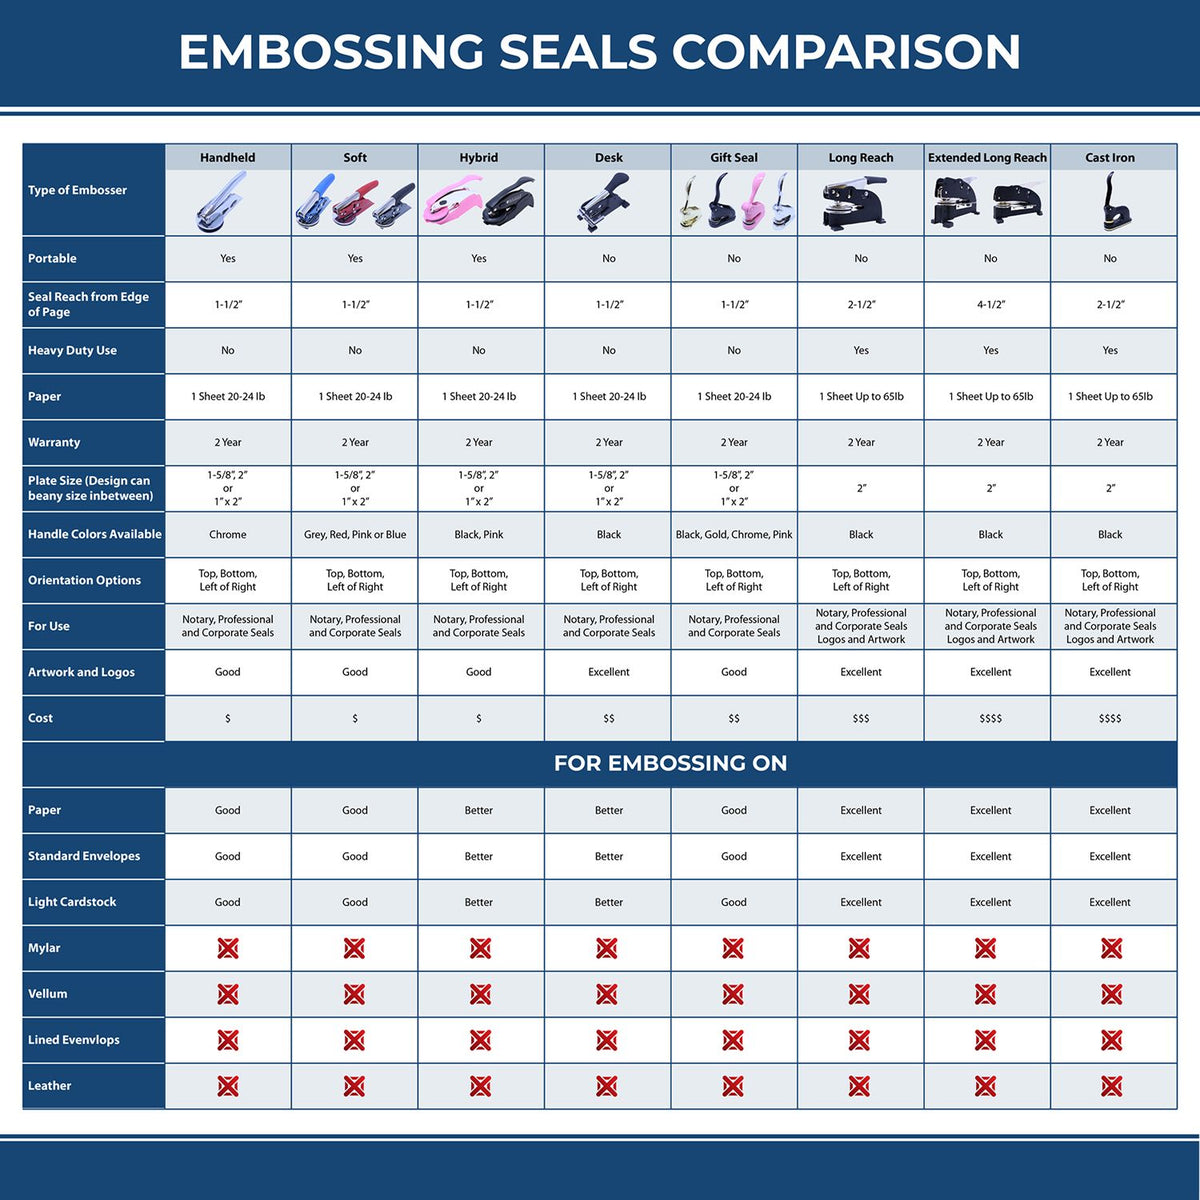 A comparison chart for the different types of mount models available for the Hybrid Minnesota Engineer Seal